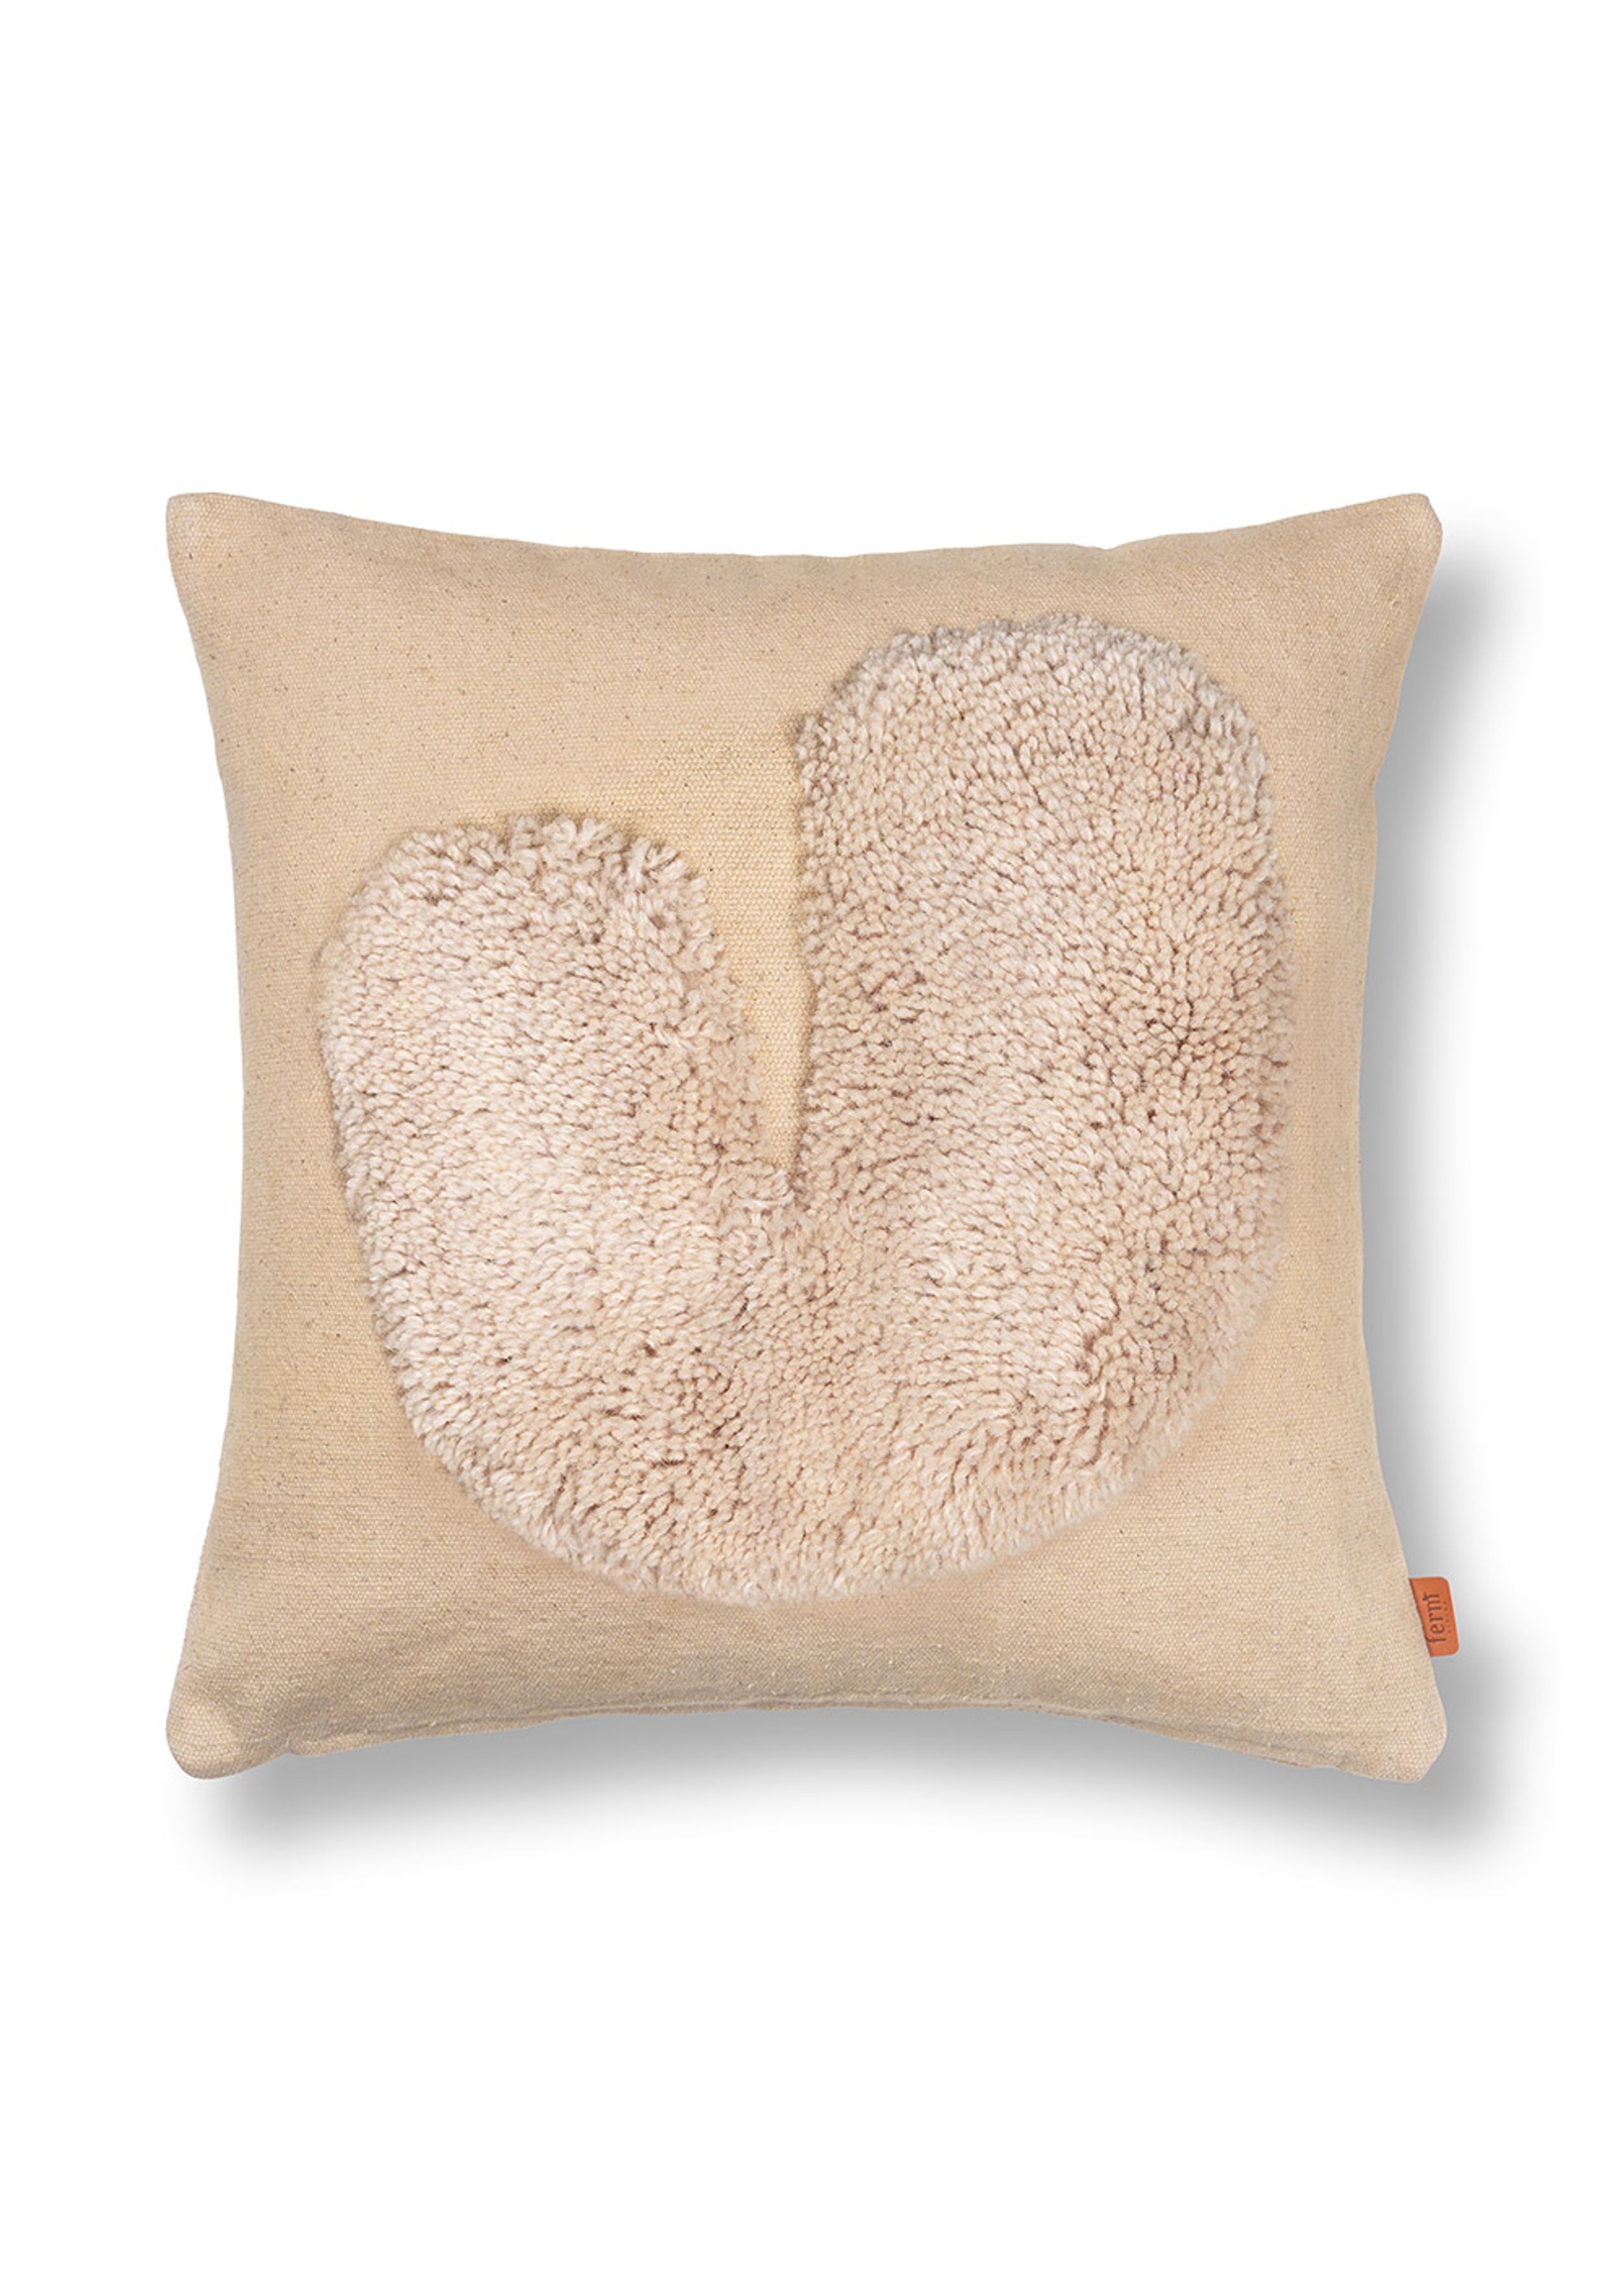 Ithaca hundrede Tilstand Lay Cushion - Pude - Ferm Living